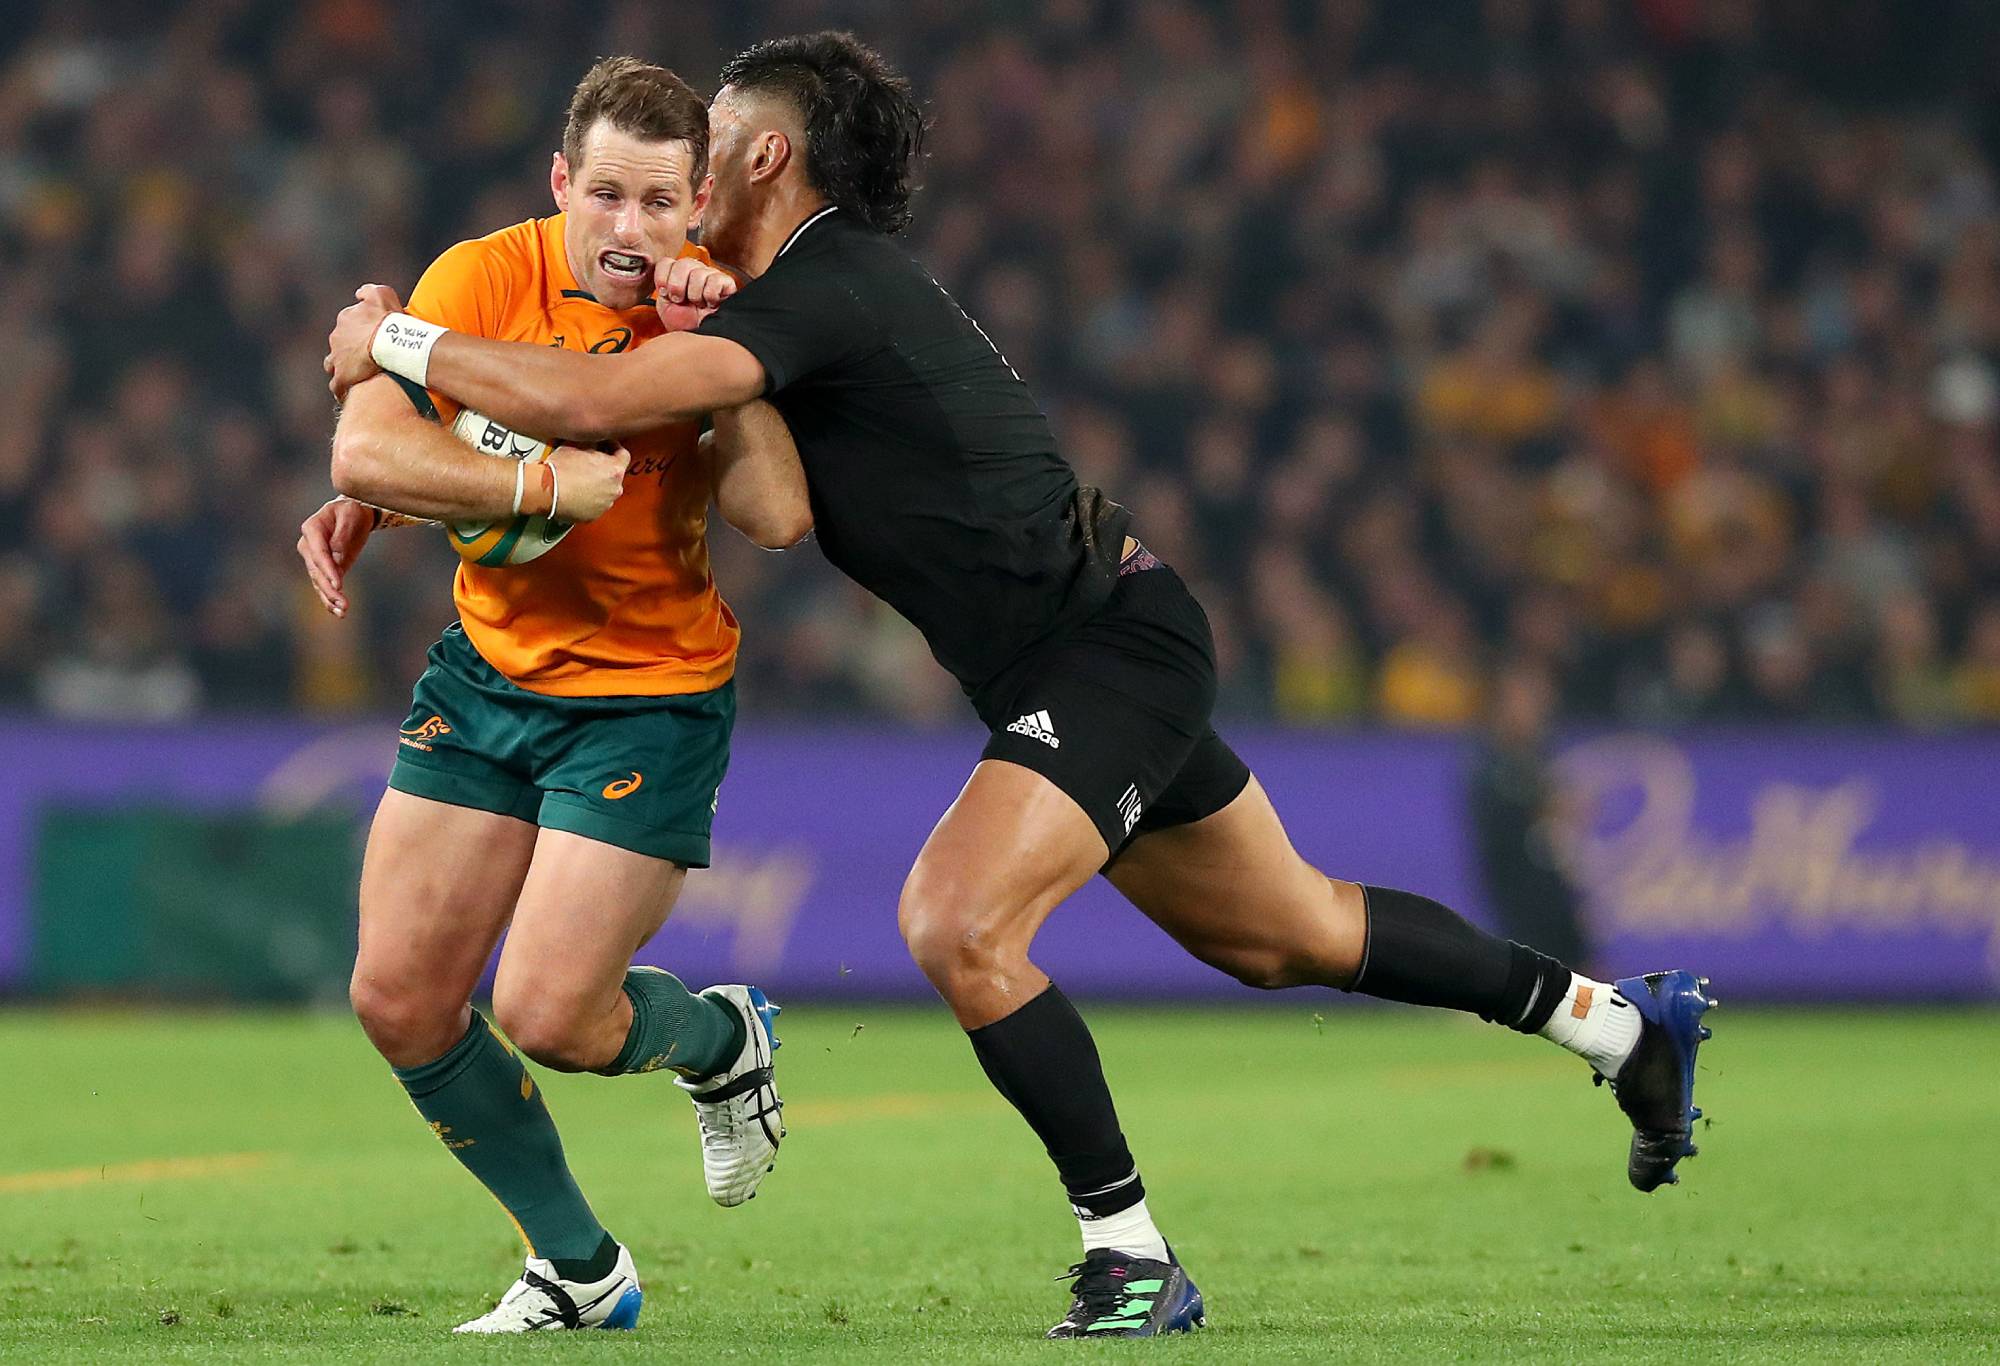 Bernard Foley of the Wallabies is tackled by Rieko Ionae of the All Blacks during The Rugby Championship & Bledisloe Cup match between the Australia Wallabies and the New Zealand All Blacks at Marvel Stadium on September 15, 2022 in Melbourne, Australia. (Photo by Kelly Defina/Getty Images)